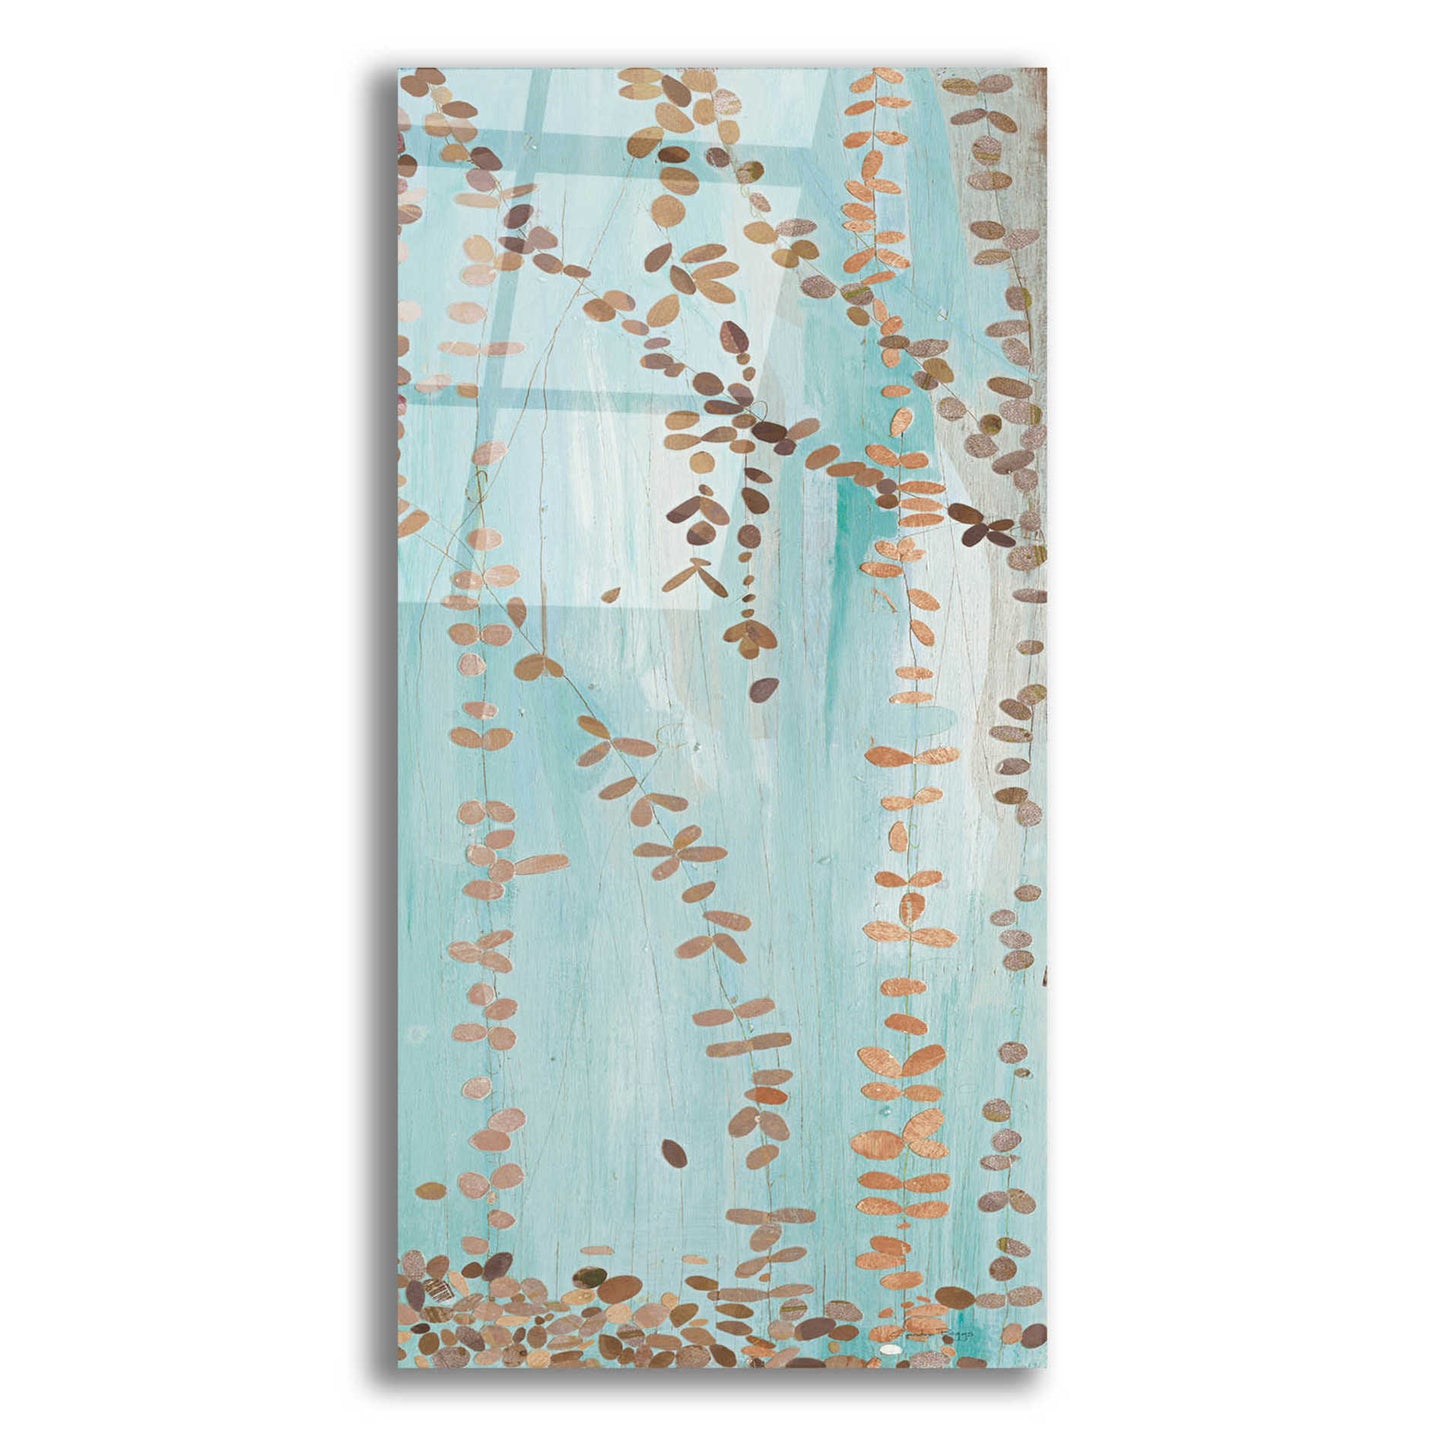 Epic Art 'Trailing Vines III Blue' by Candra Boggs,  Acrylic Glass Wall Art,12x24